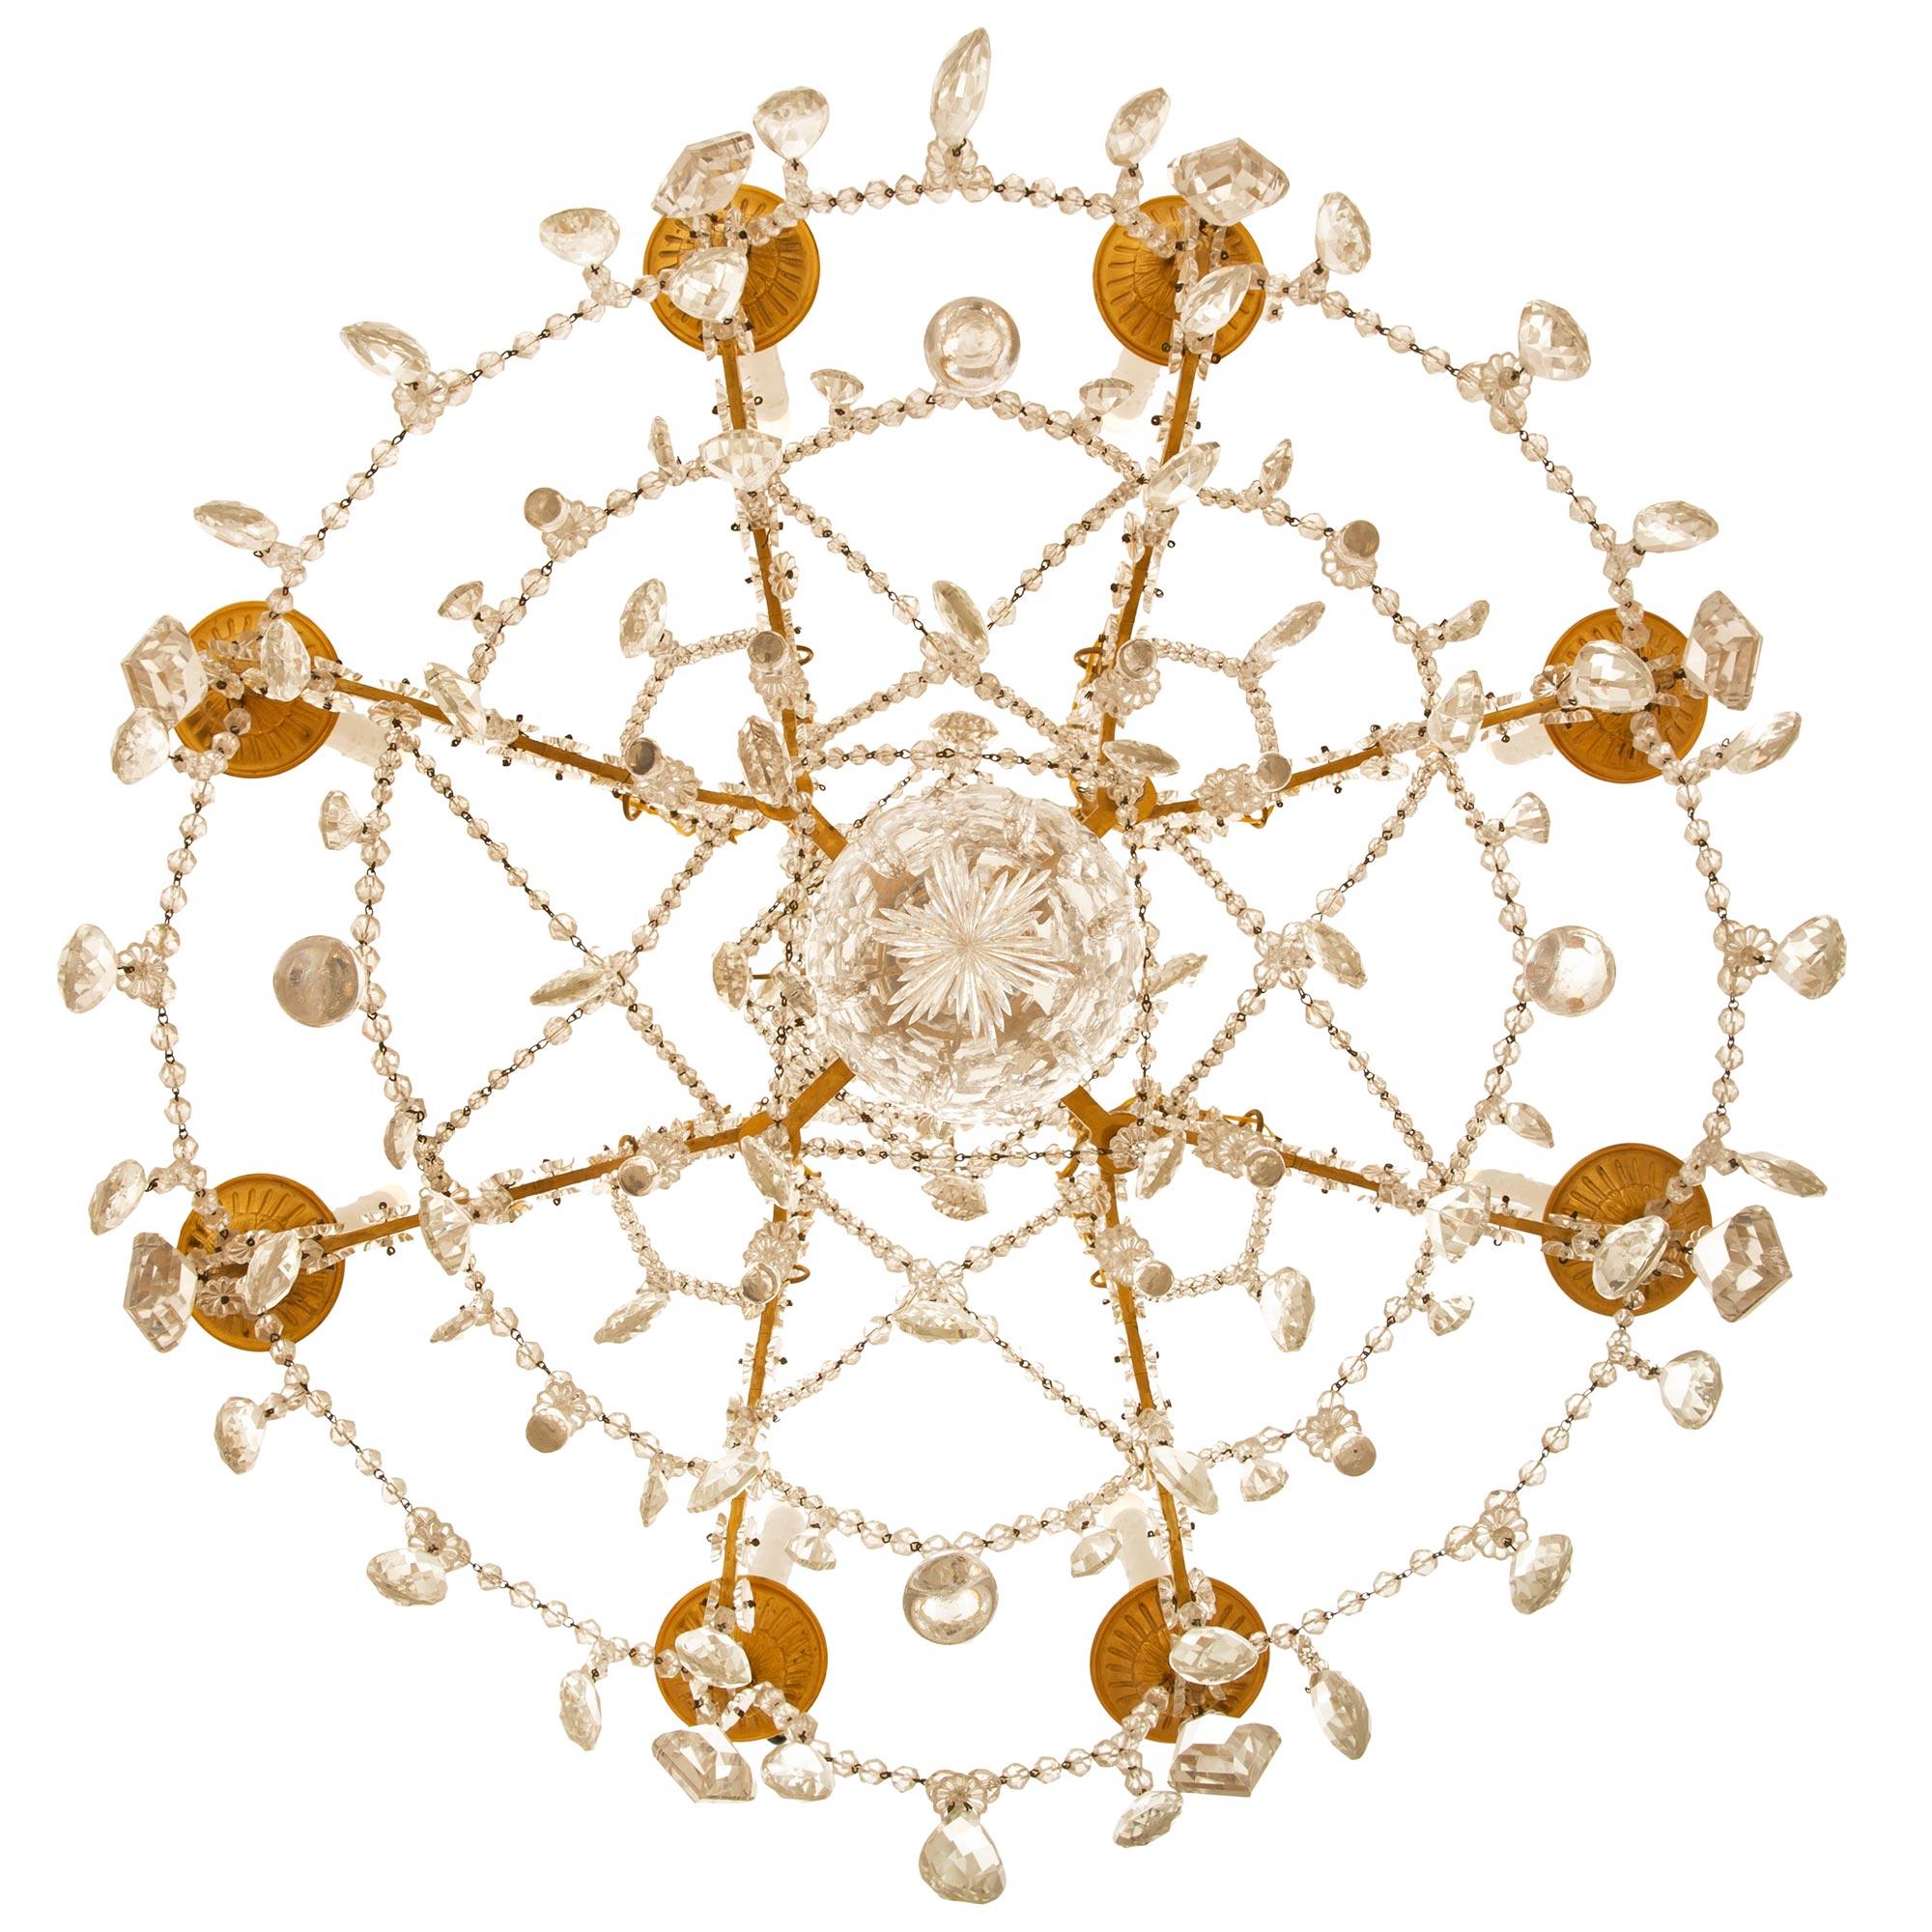 French 19th Century Louis XVI Style Eight-Light Baccarat Crystal Chandelier For Sale 5